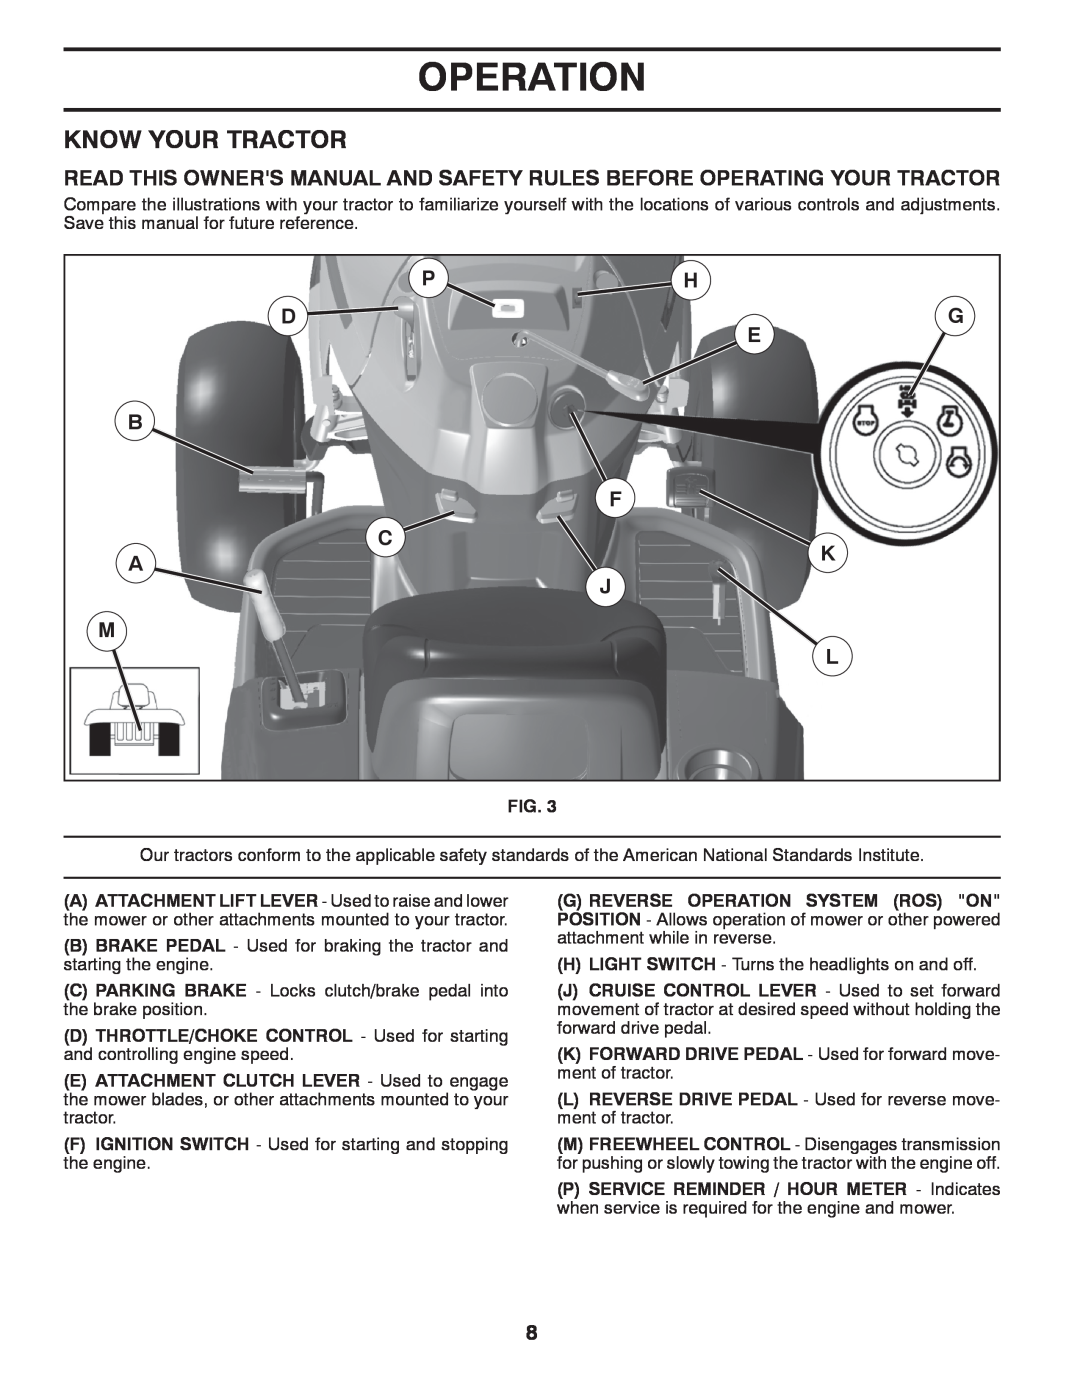 Husqvarna 96045000414, 532 42 84-01 owner manual Know Your Tractor, Ph Dg E, Operation 